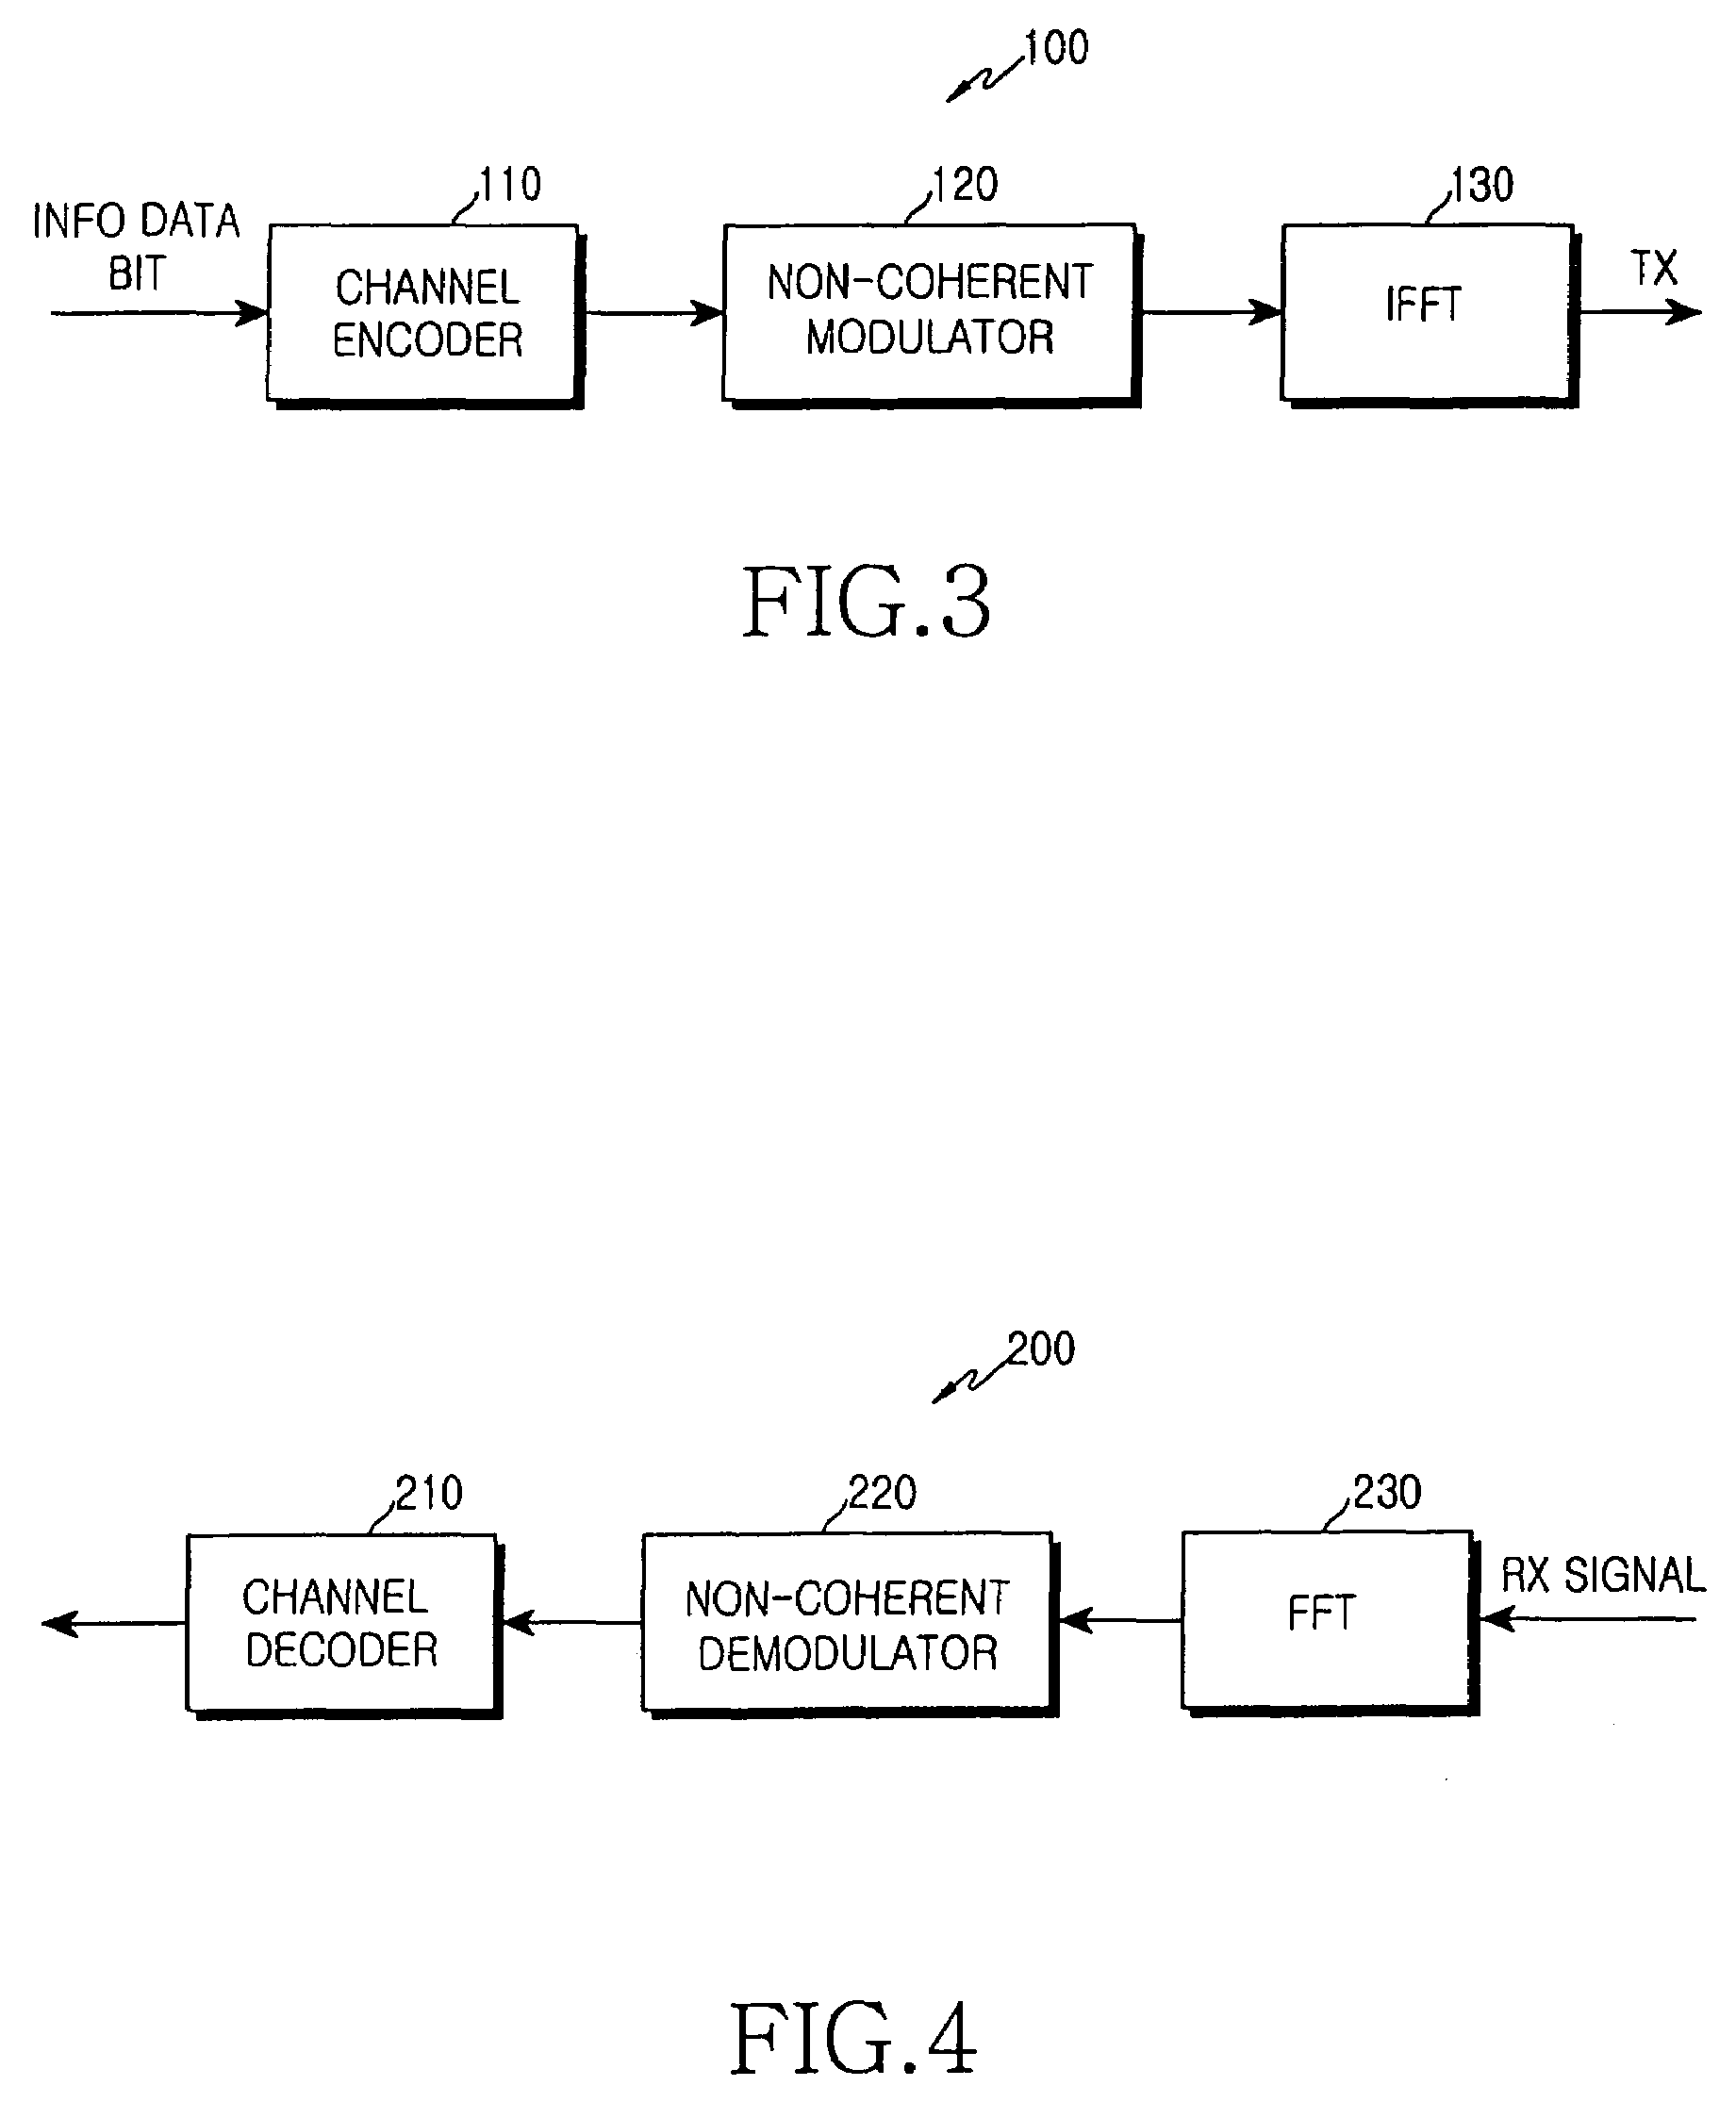 Method and apparatus for transmitting uplink fast feedback information in an OFDMA communication system